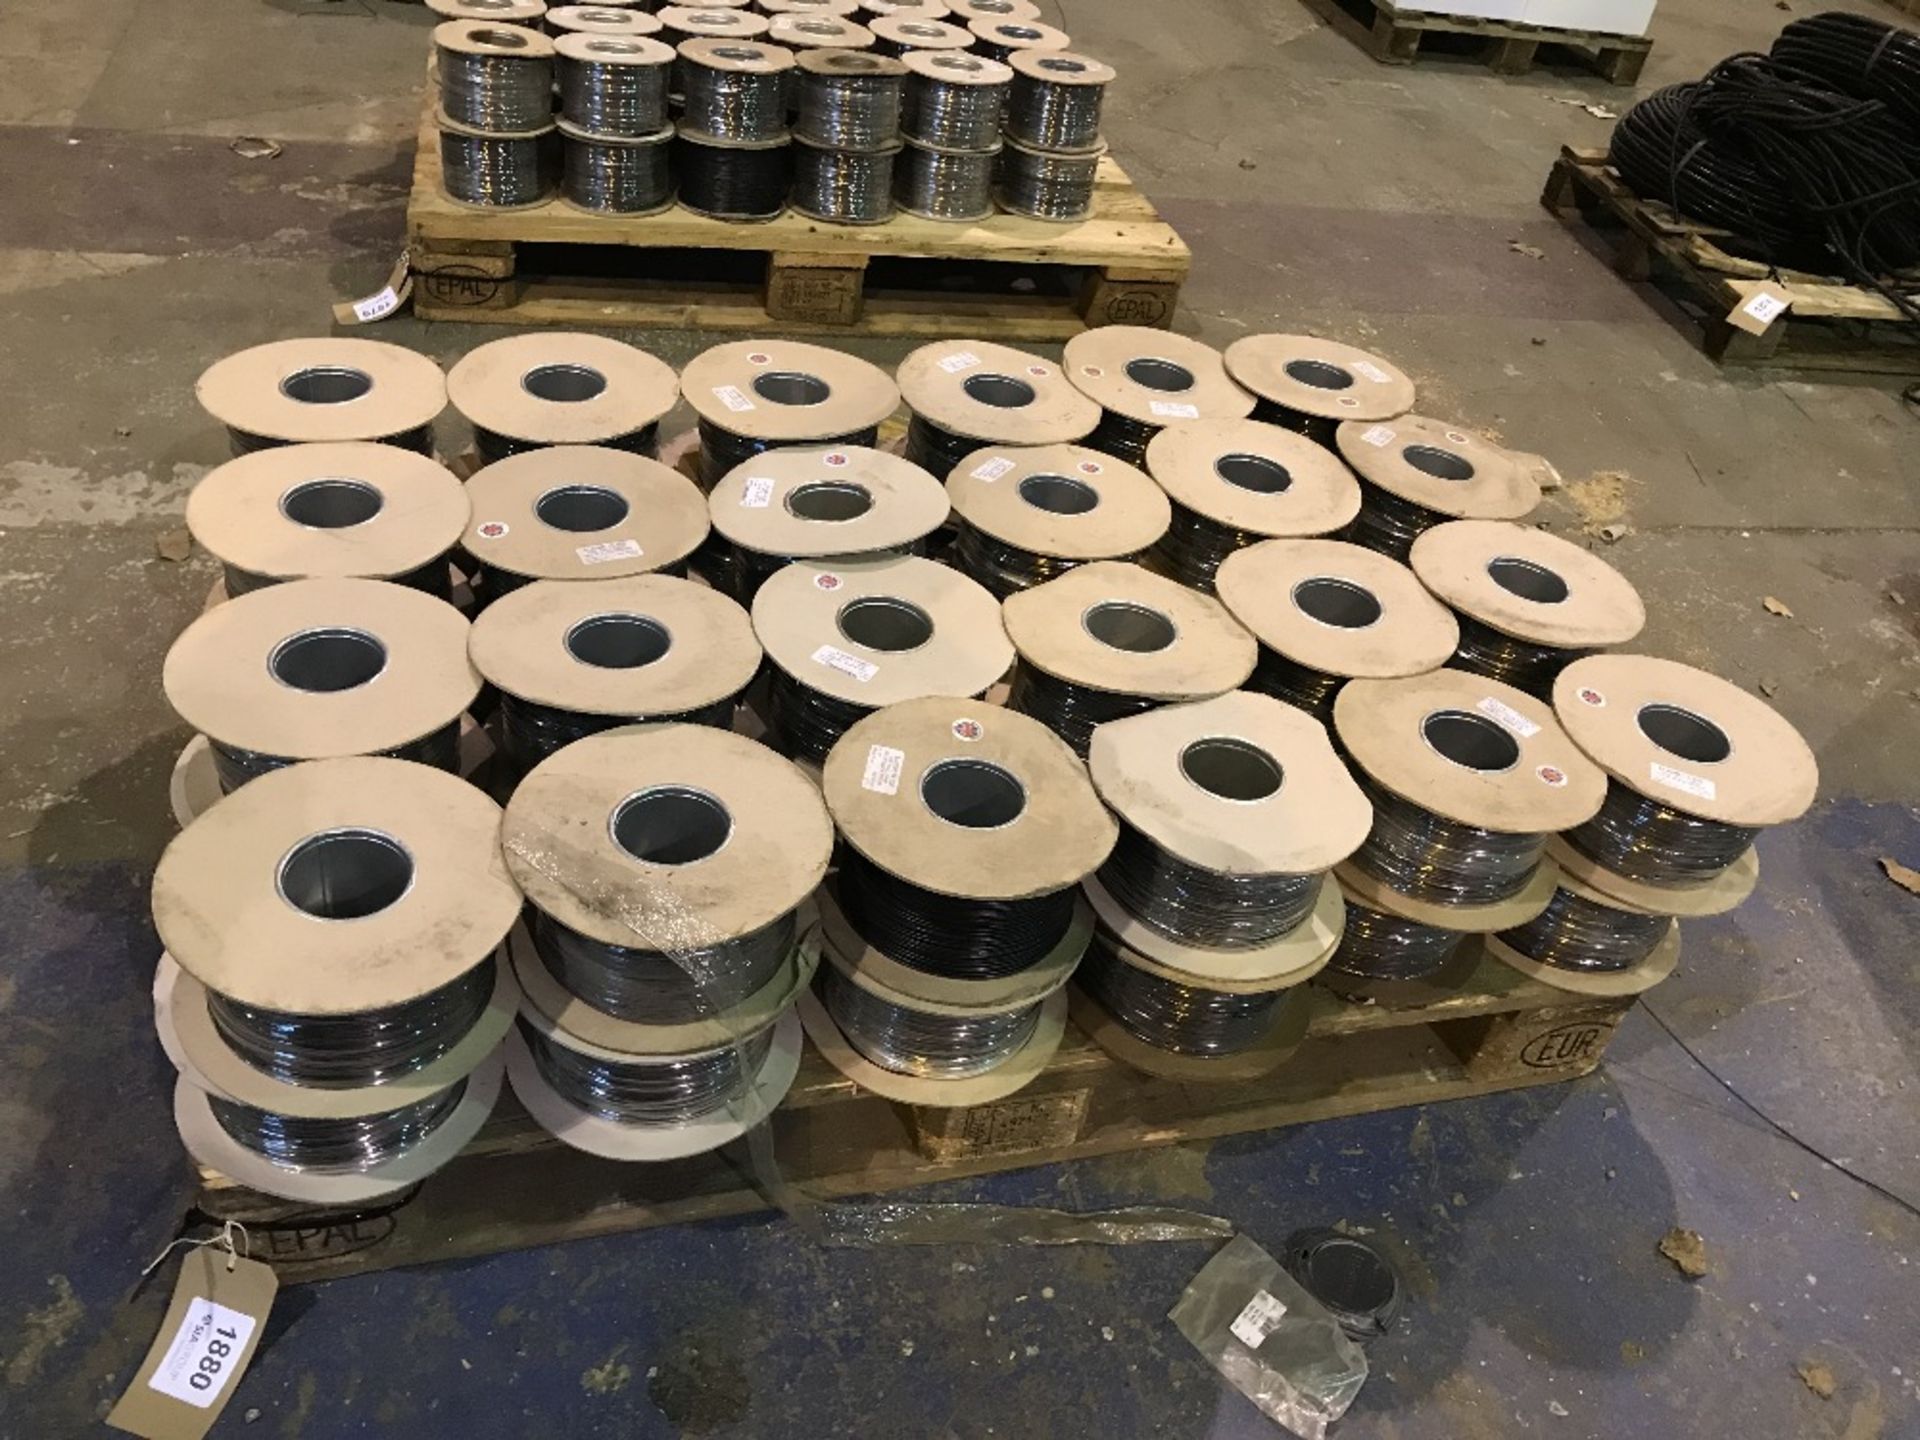 Approximately (48) Spools of 500 Metre Various Size and Colour S1209B Thin Wall Electrical Cable